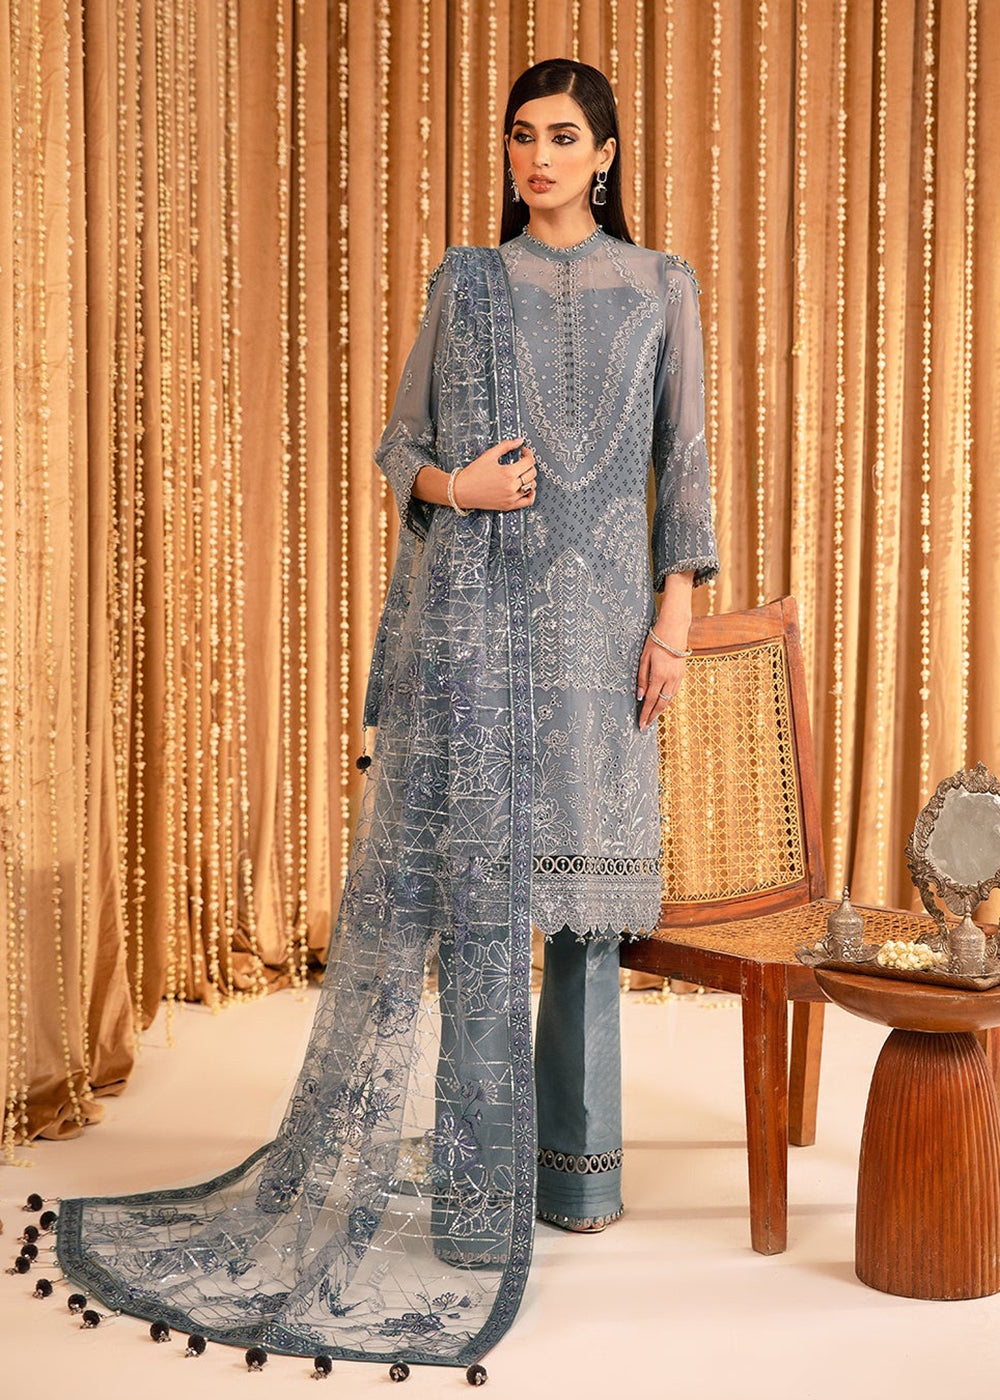 Mehfil E Uroos Luxury Formals 23 by Alizeh | V16D03 - Aabgeena